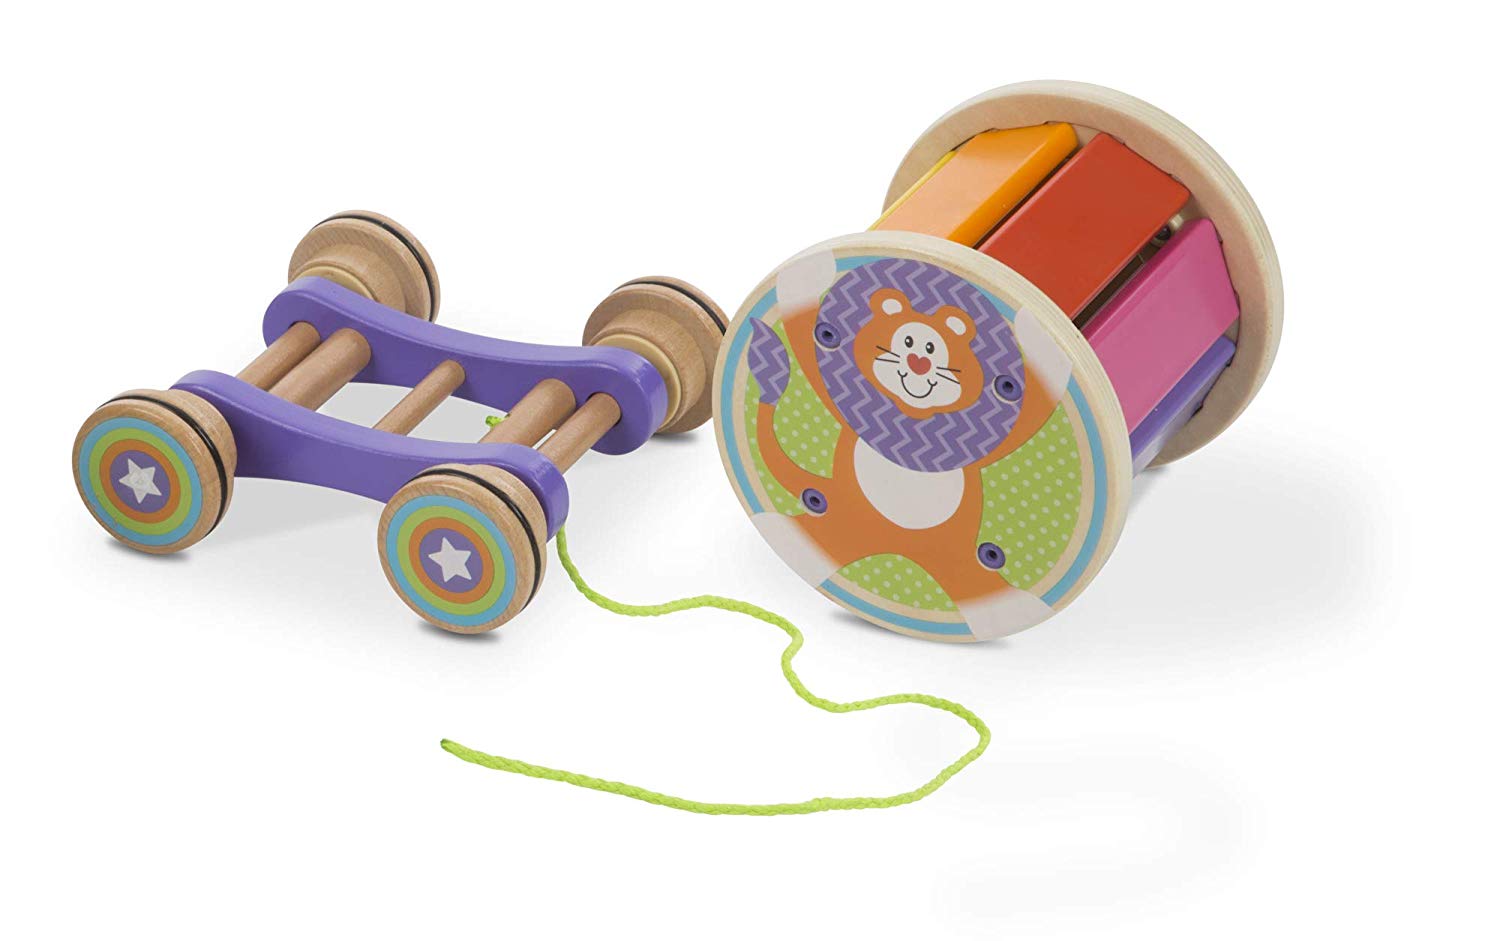 Melissa & Doug Classic First Play 13012 Wooden Toys Multi-Coloured